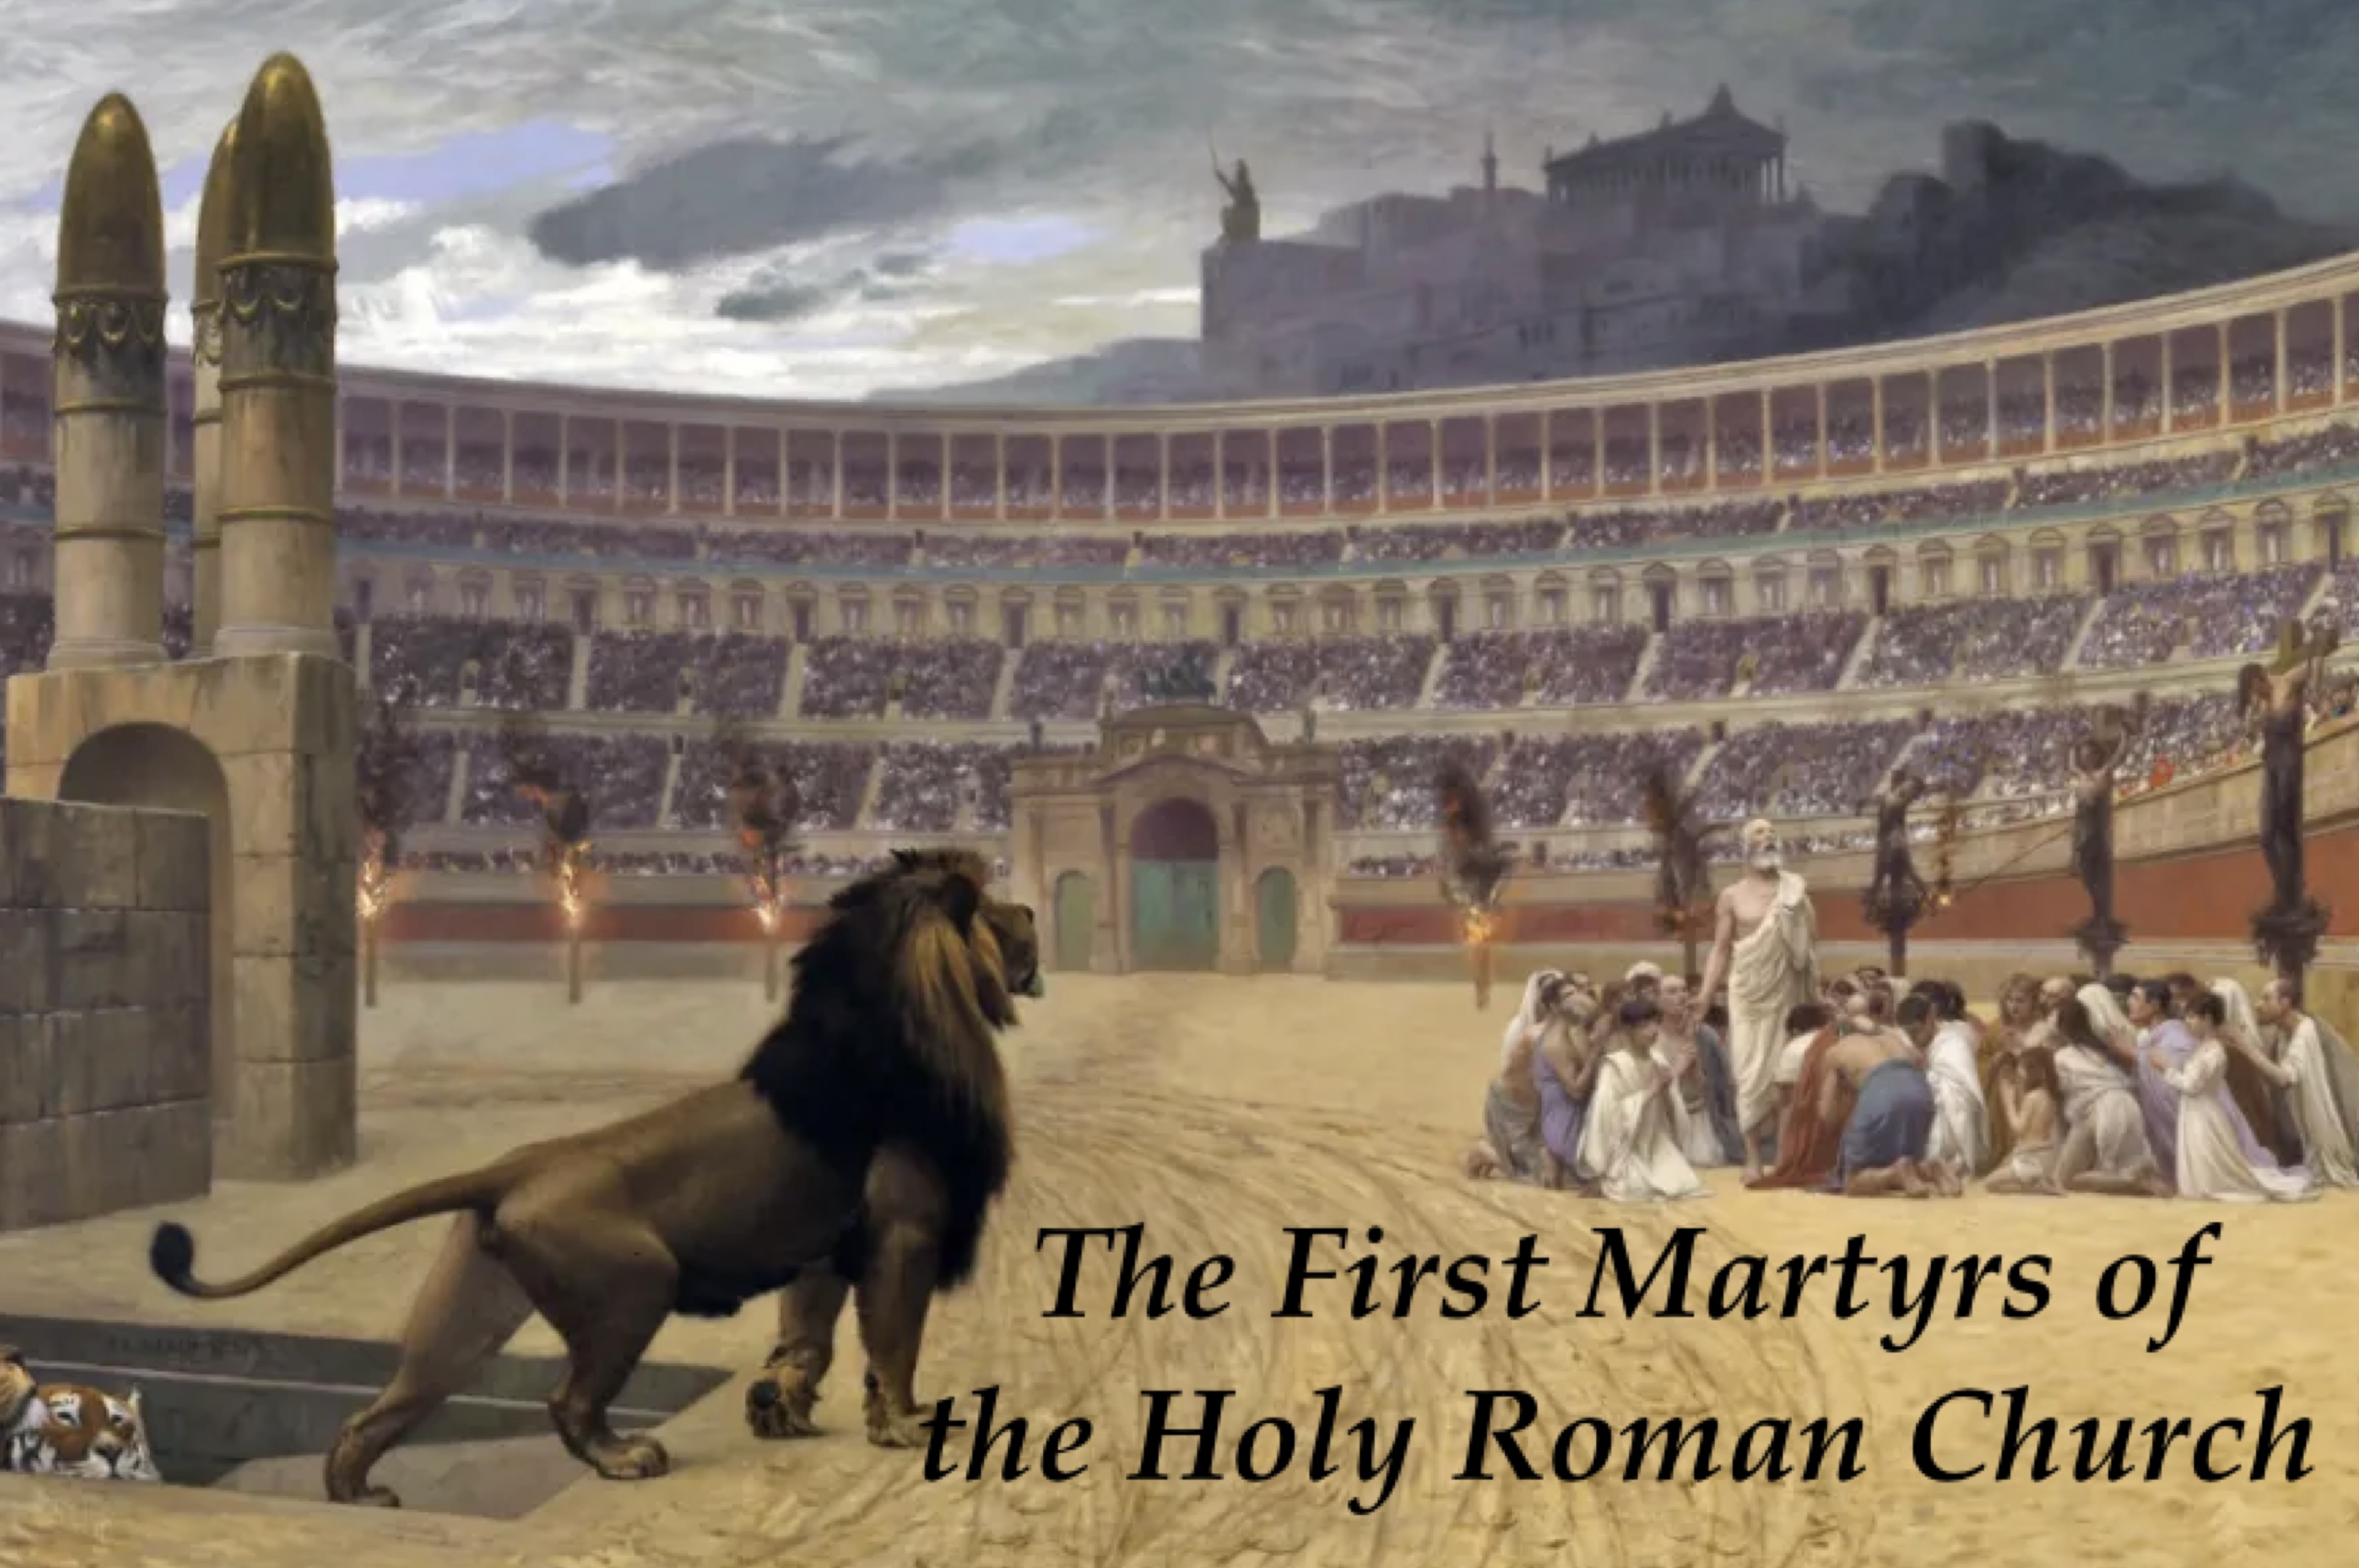 30th June - The First Martyrs of the Holy Roman Church